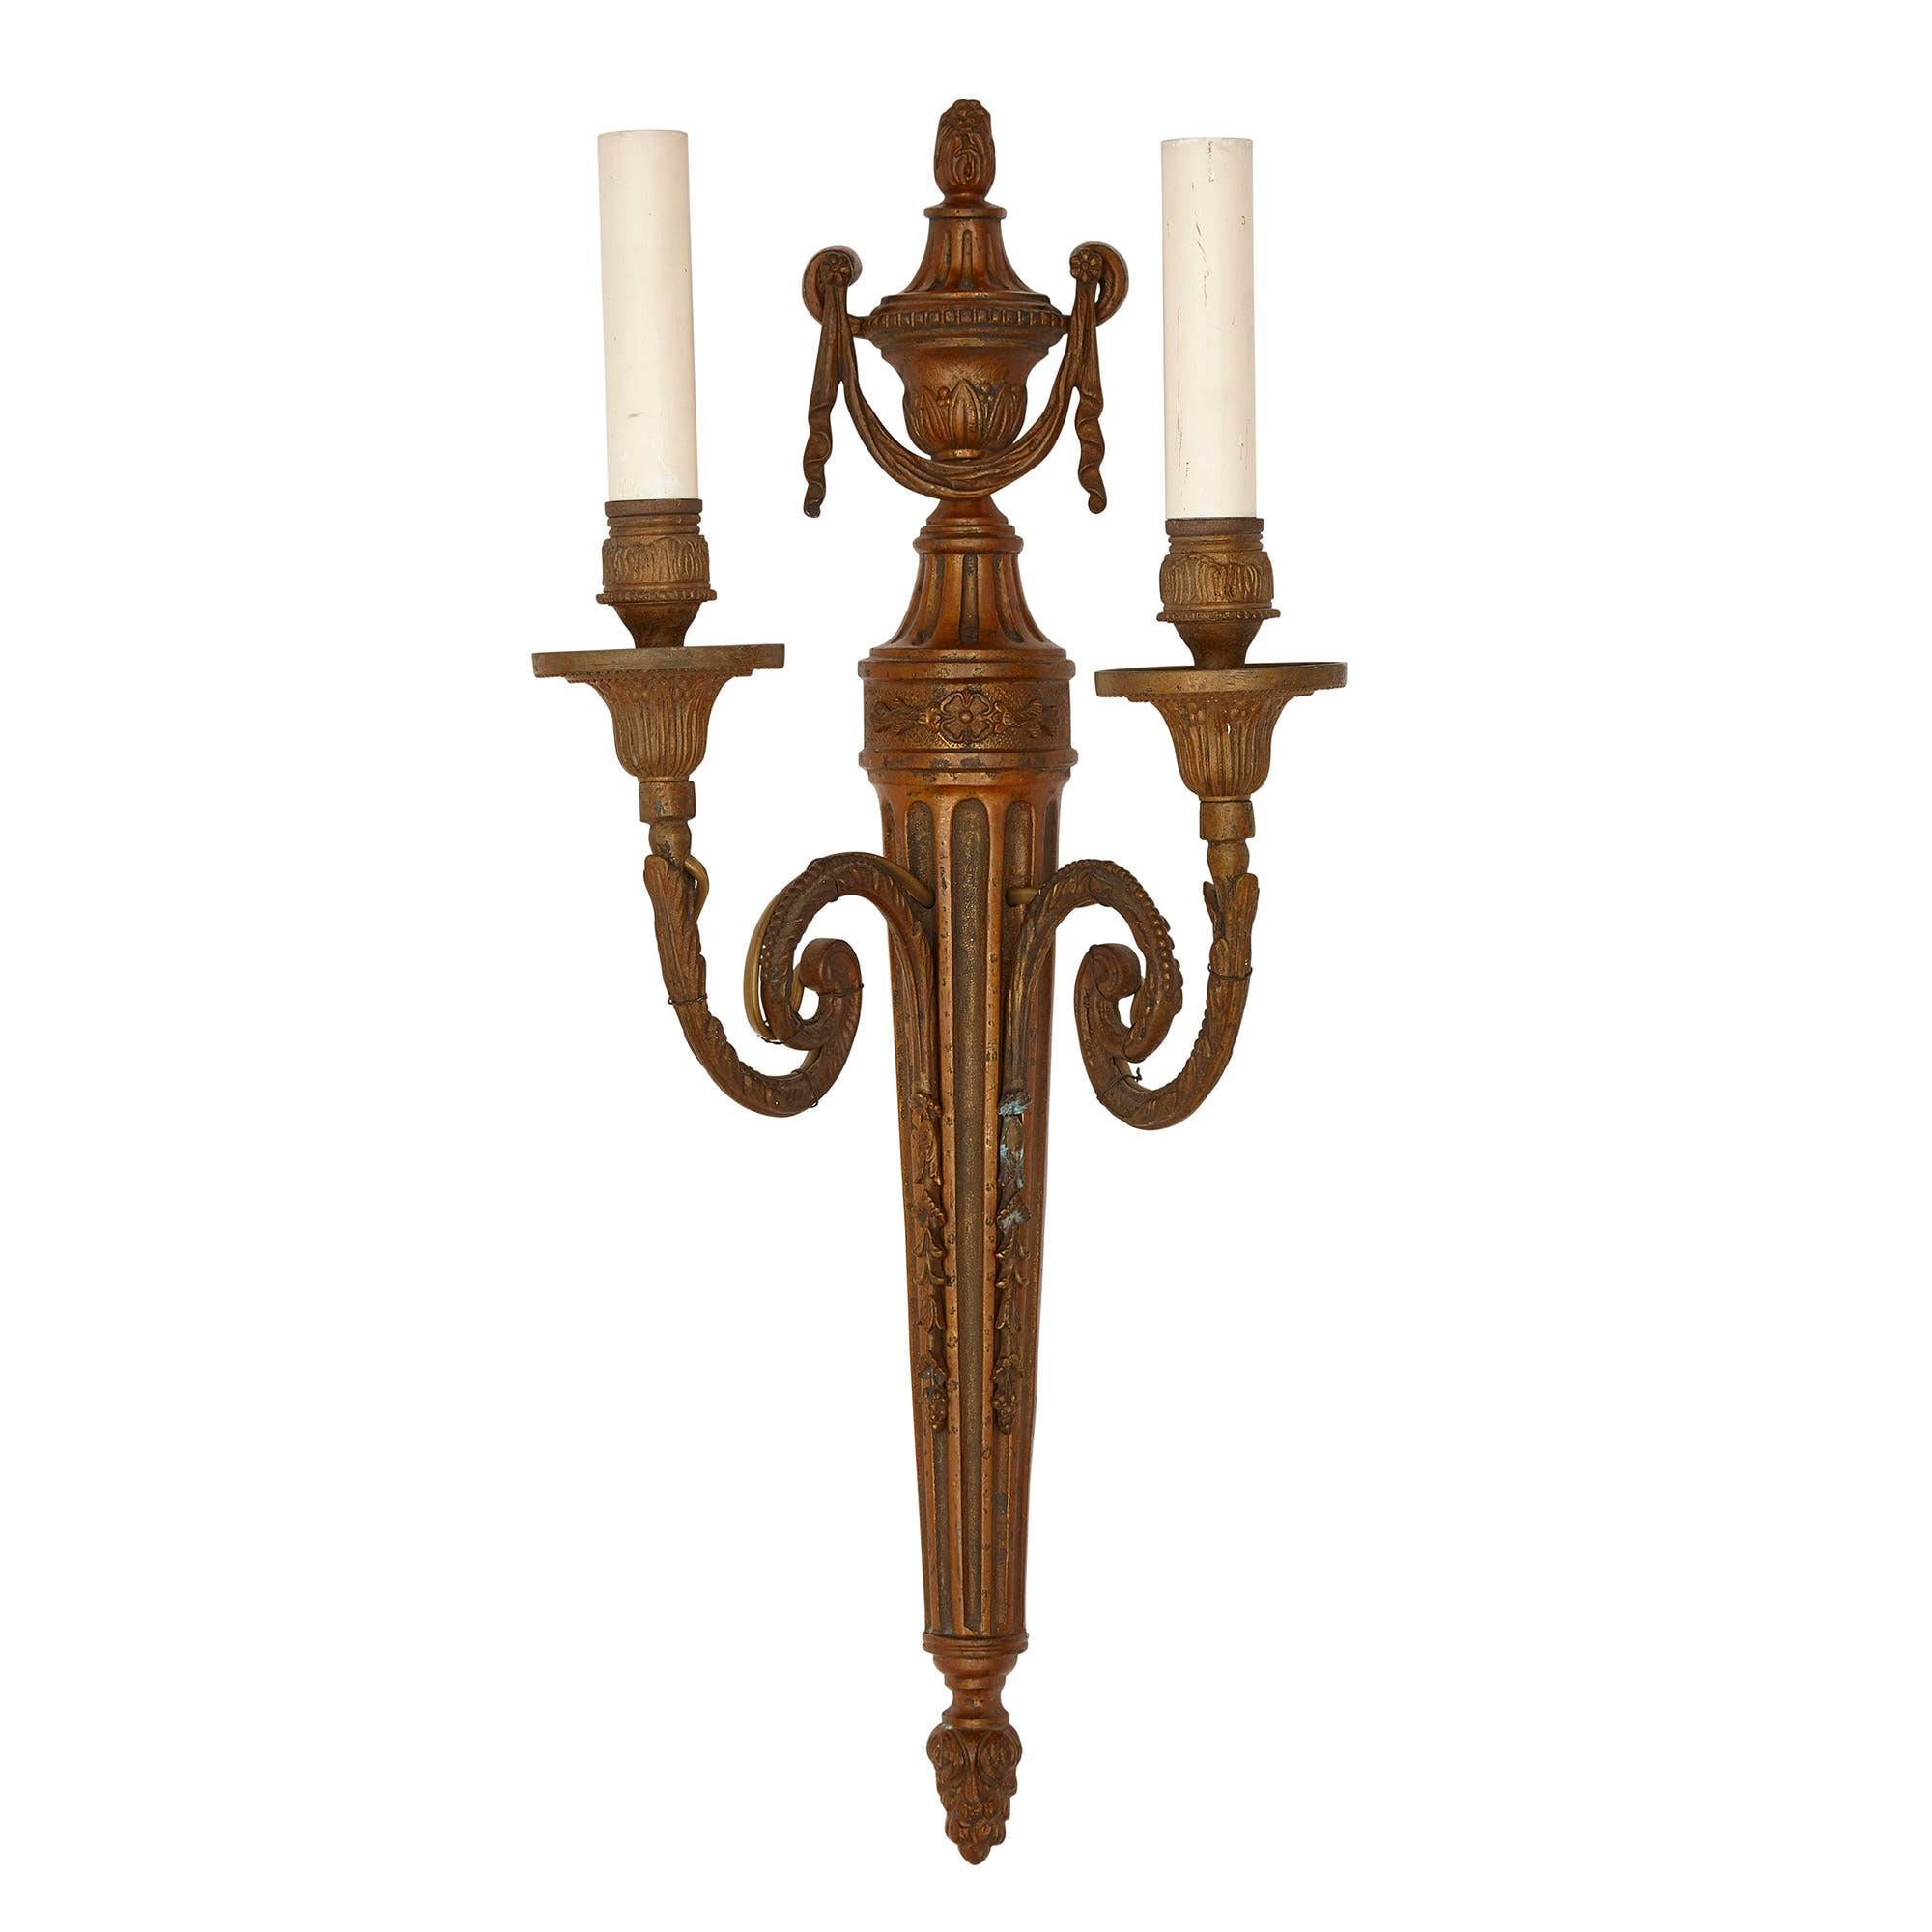 Set of three metal sconces in the neoclassical style
French, 20th Century
Height 52cm, width 23cm, depth 15cm

Each sconce in this set of three is crafted from warmly patinated metal in the Neoclassical style. Each sconce features a shaft-form